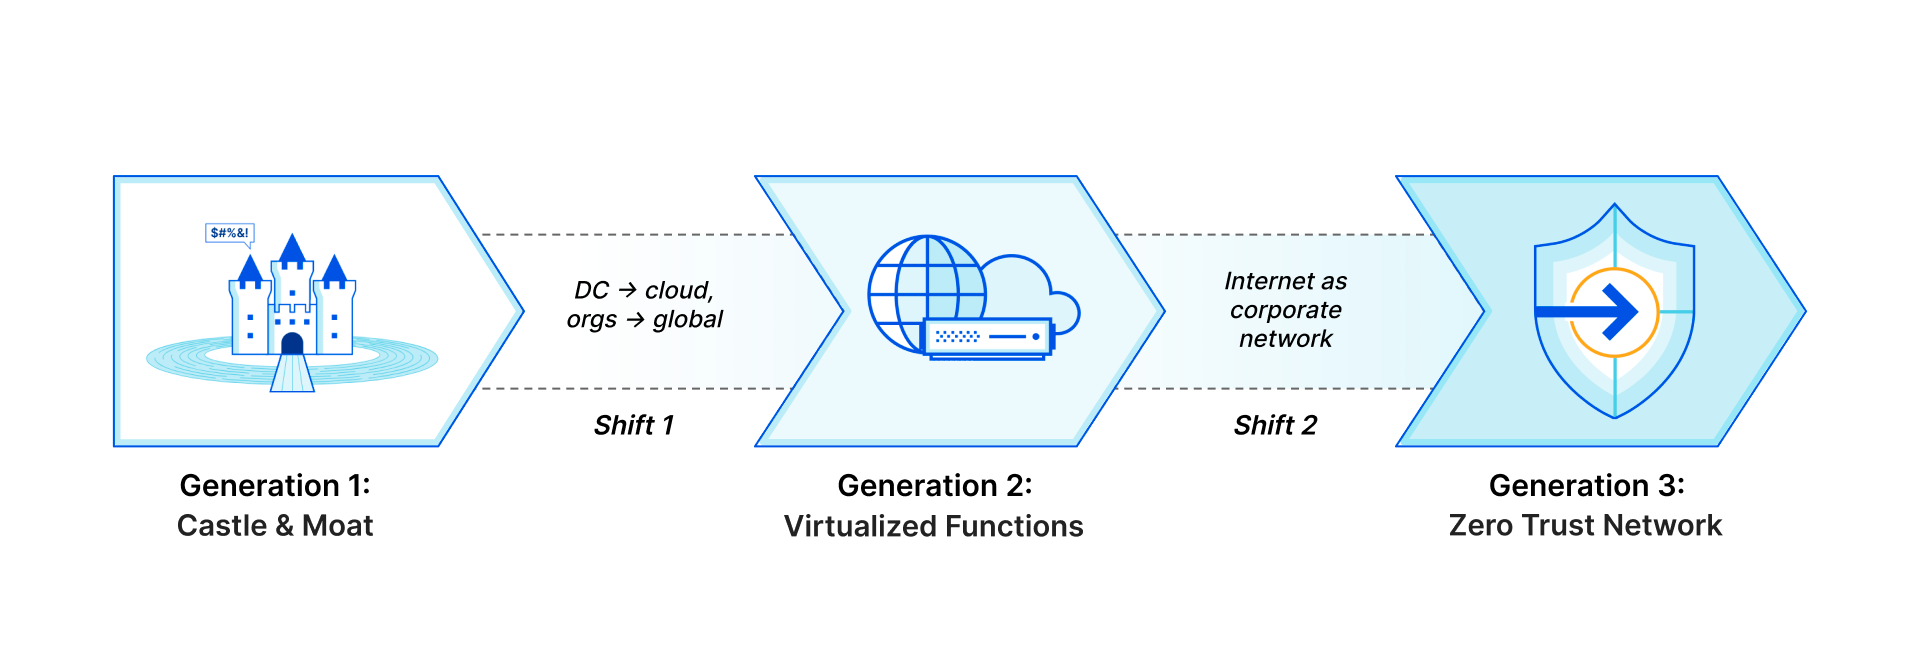 Generation 1: Castle and Moat; Generation 2: Virtualized Functions; Generation 3: Zero Trust Network